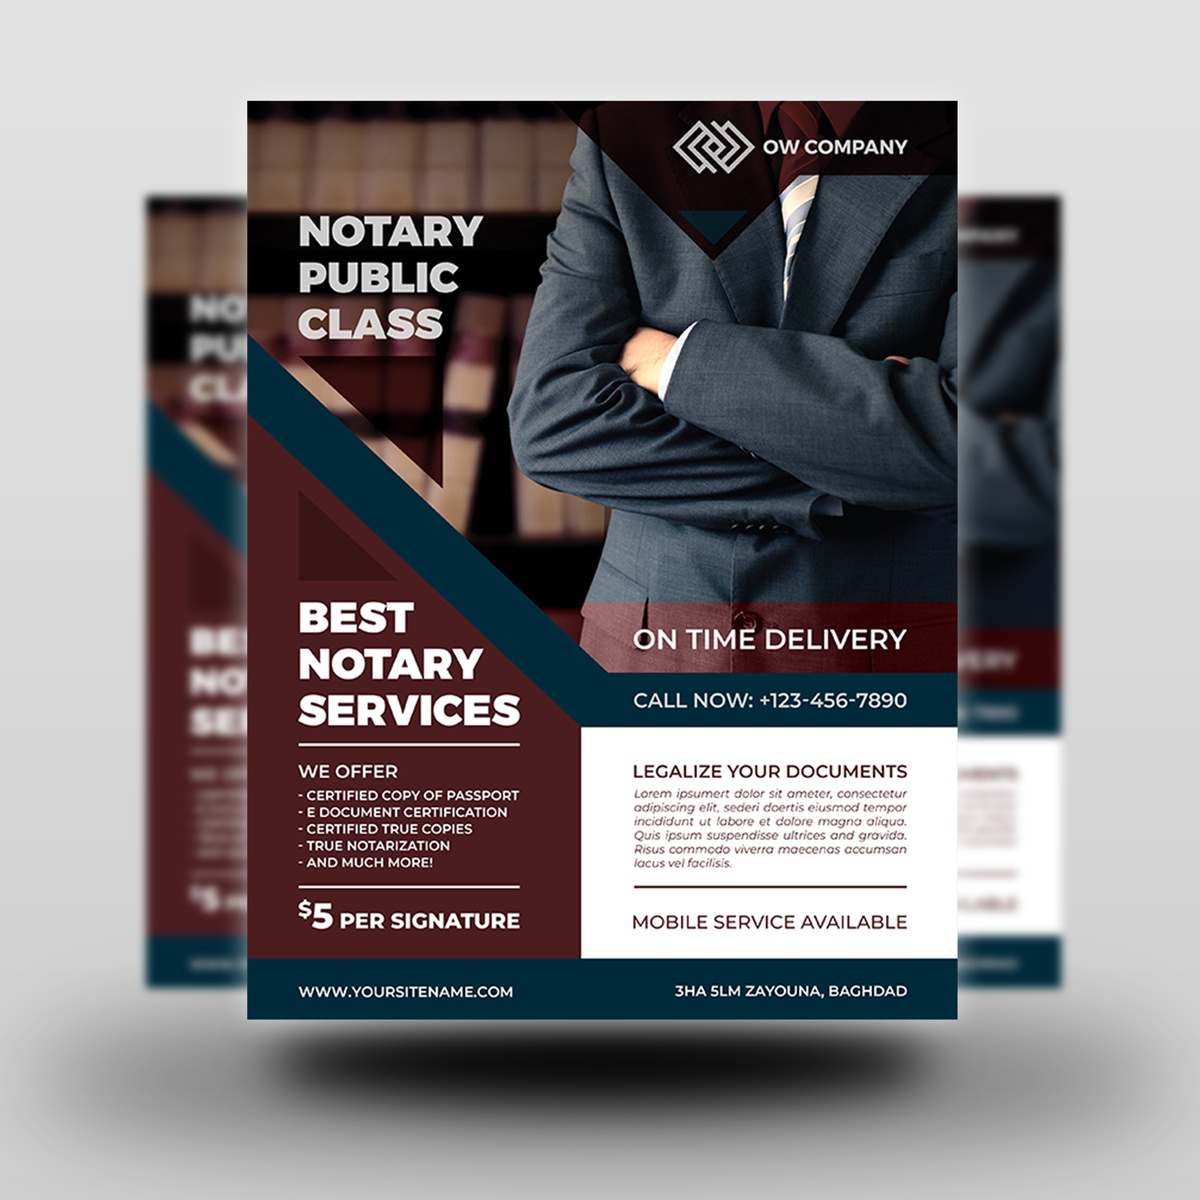 Notary Services Flyer Template By OWPictures On Dribbble In Notary Public Flyer Template